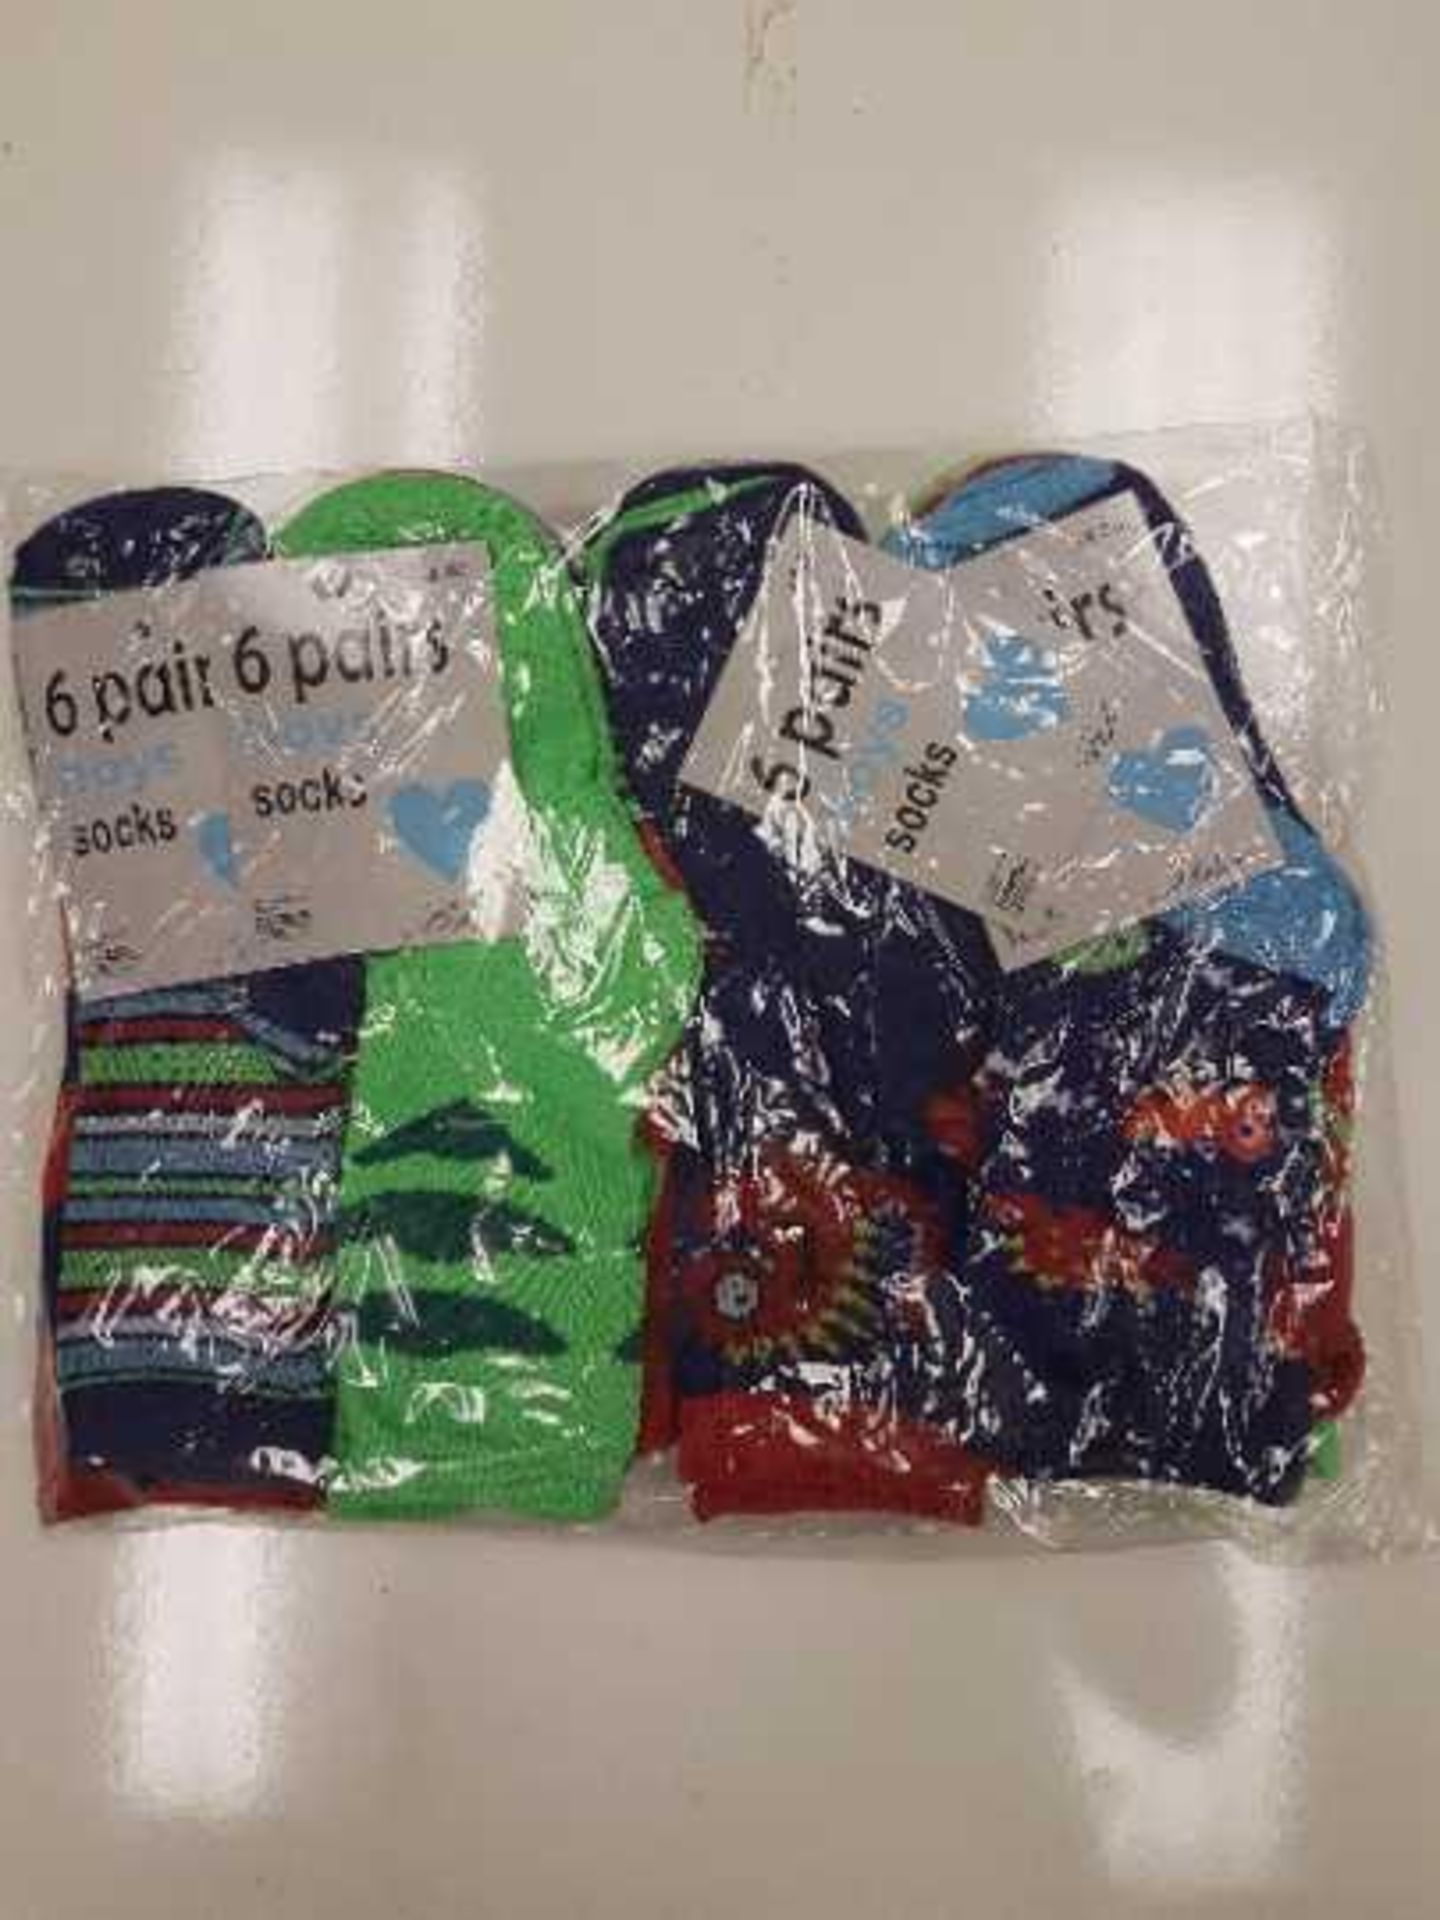 4 Packs Of BHS Childrens Socks (each pack Contains 3 Pairs). New in Packaging - Image 2 of 2